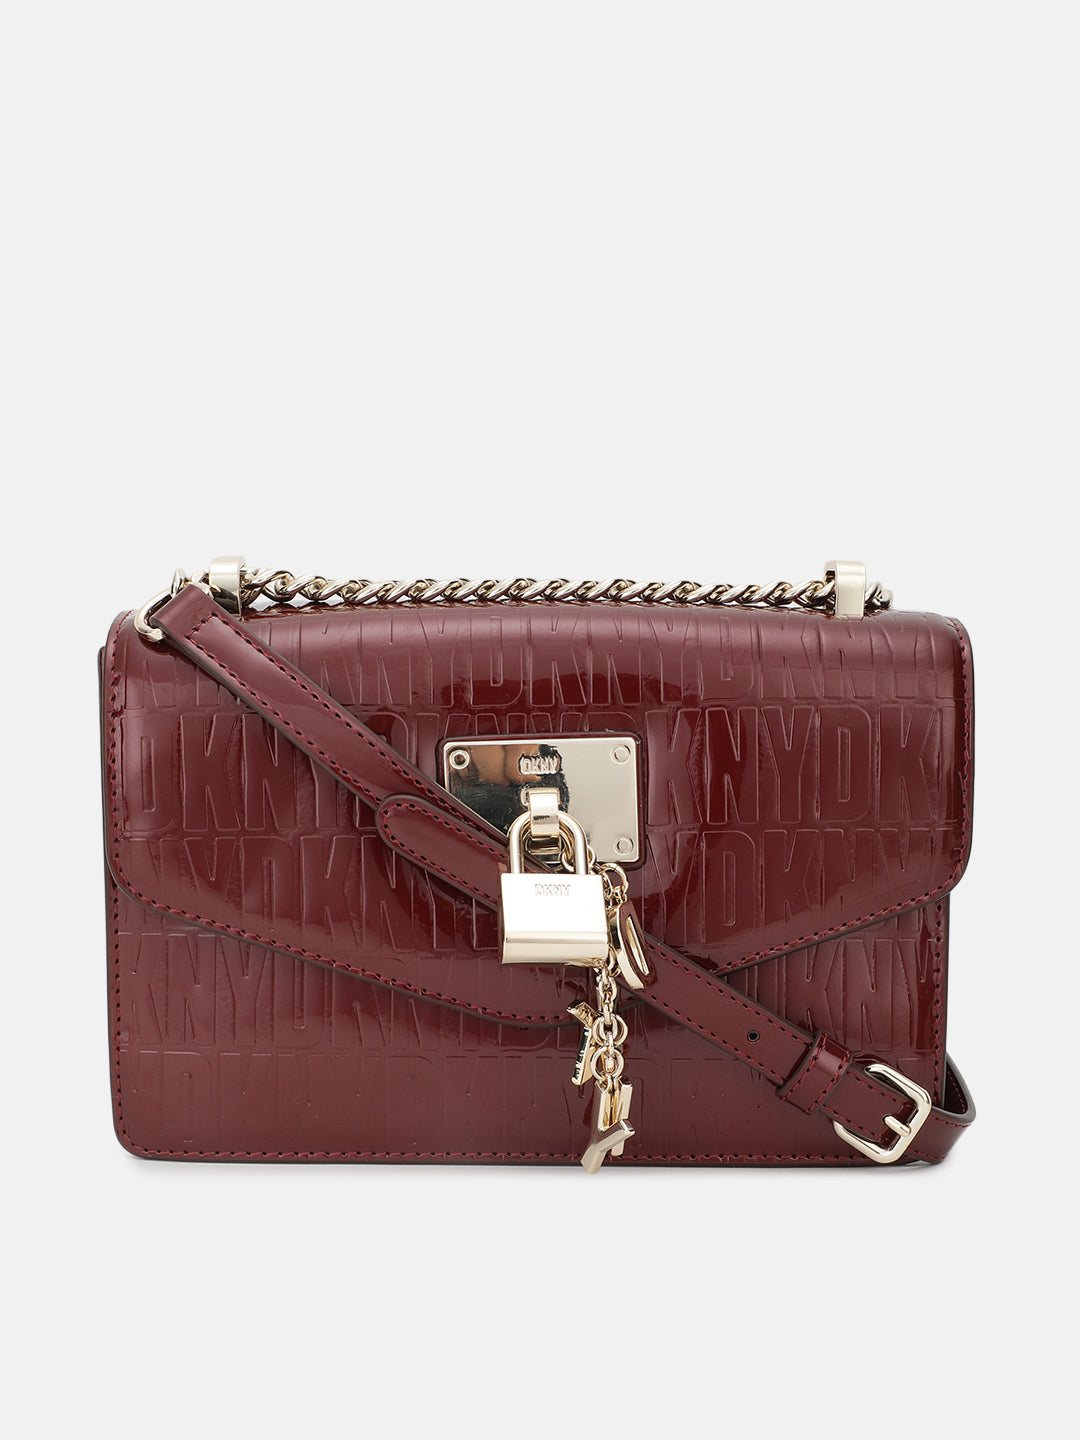 Dkny Women Red Textured Sling Bag